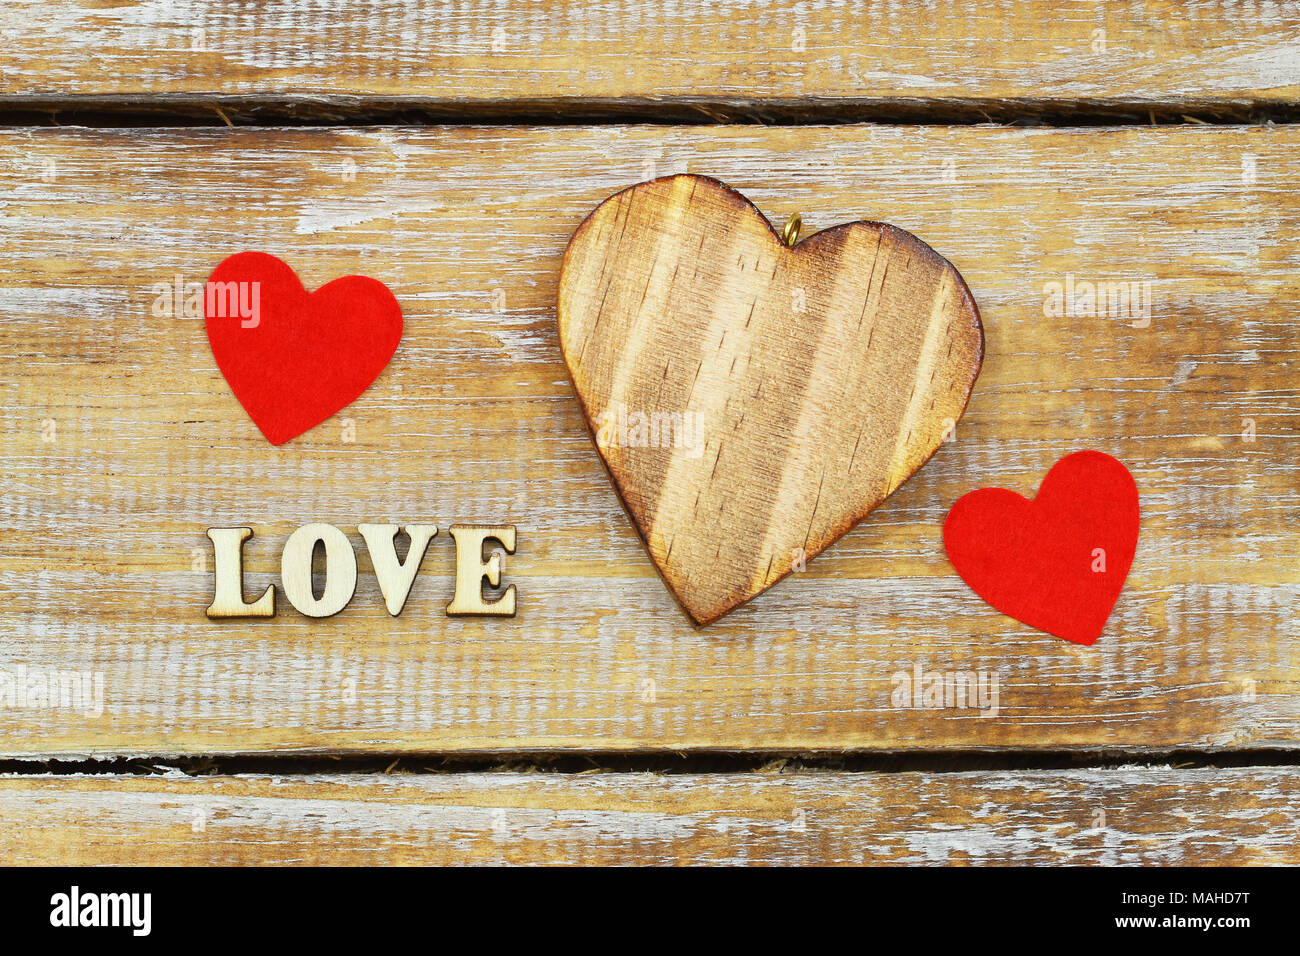 Word love written with wooden letters and hearts on rustic surface Stock Photo